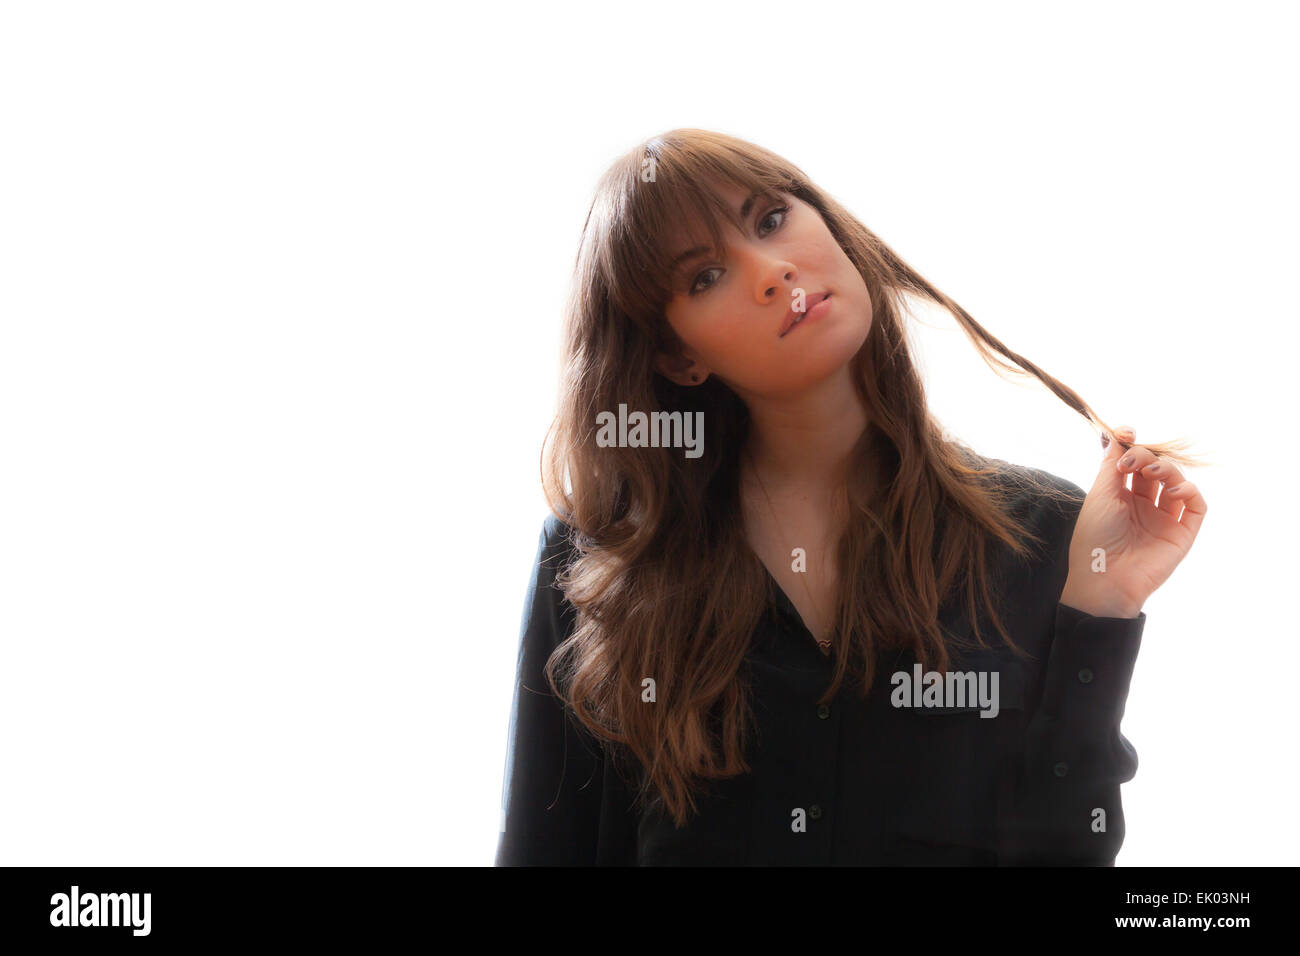 A pretty brunette model twirling her long hair between her fingers and biting her lip. Isolated on white background. Stock Photo